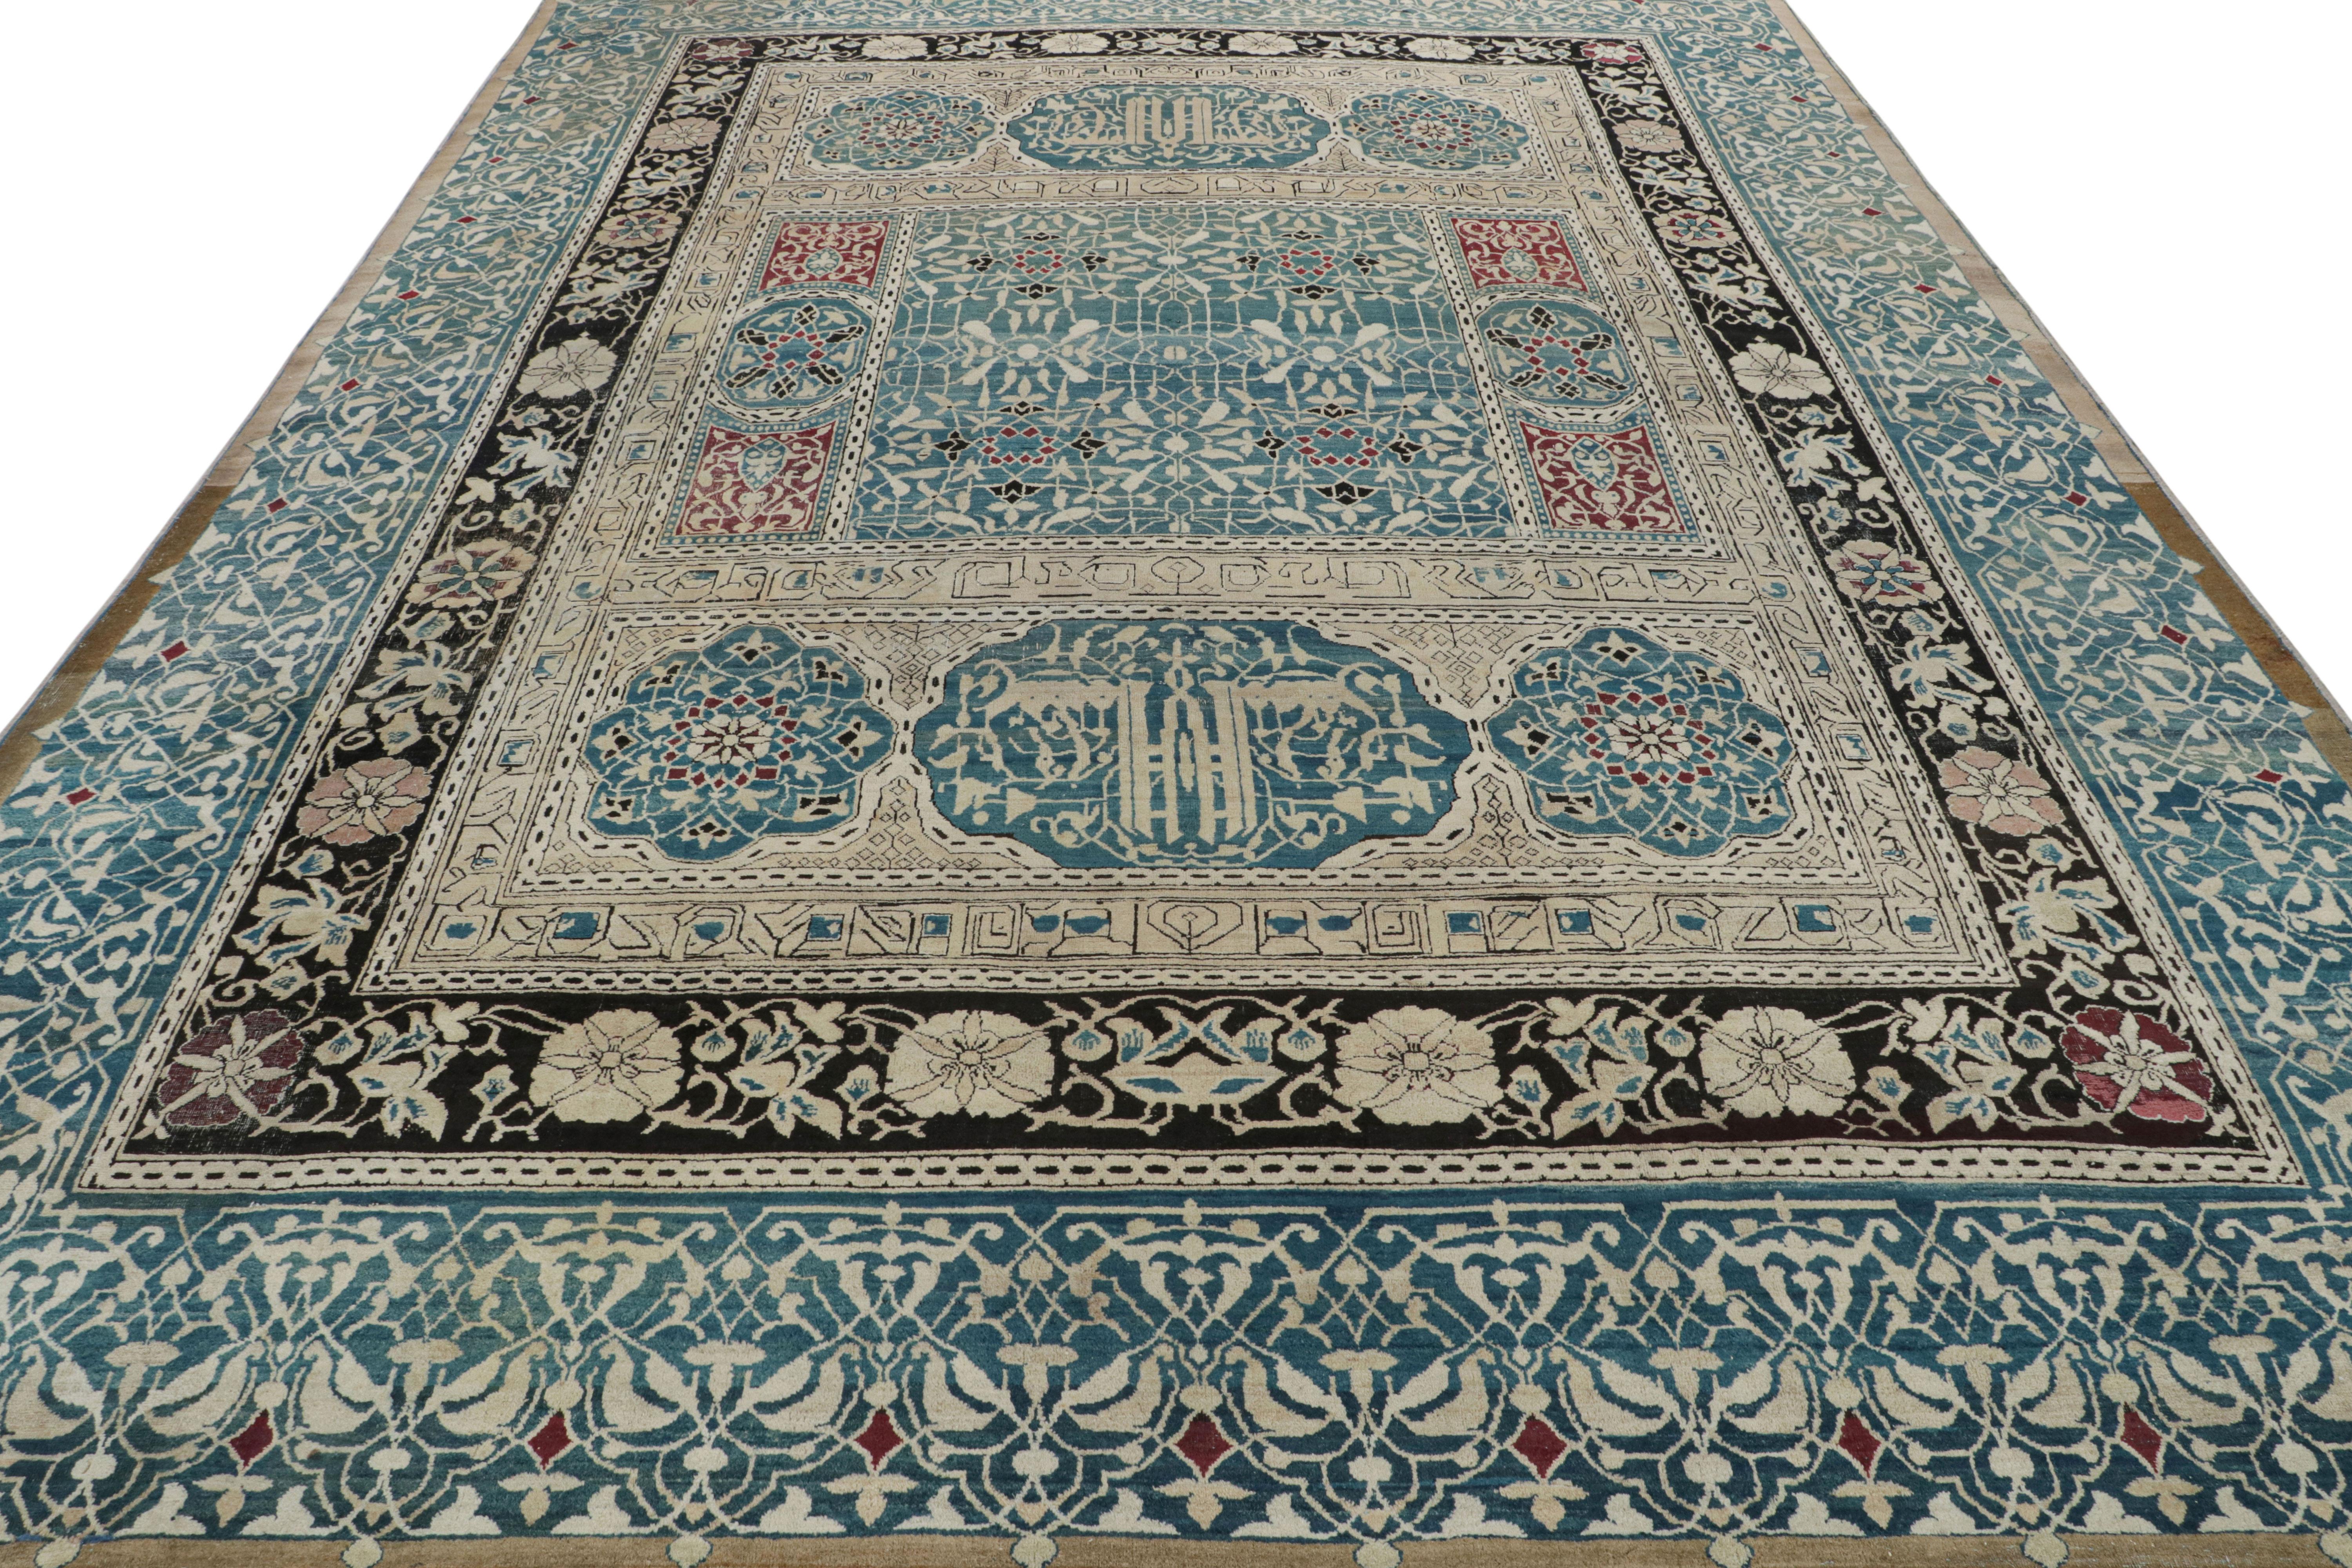 Antique Agra Rug in Beige and Teal with Floral Patterns In Good Condition For Sale In Long Island City, NY